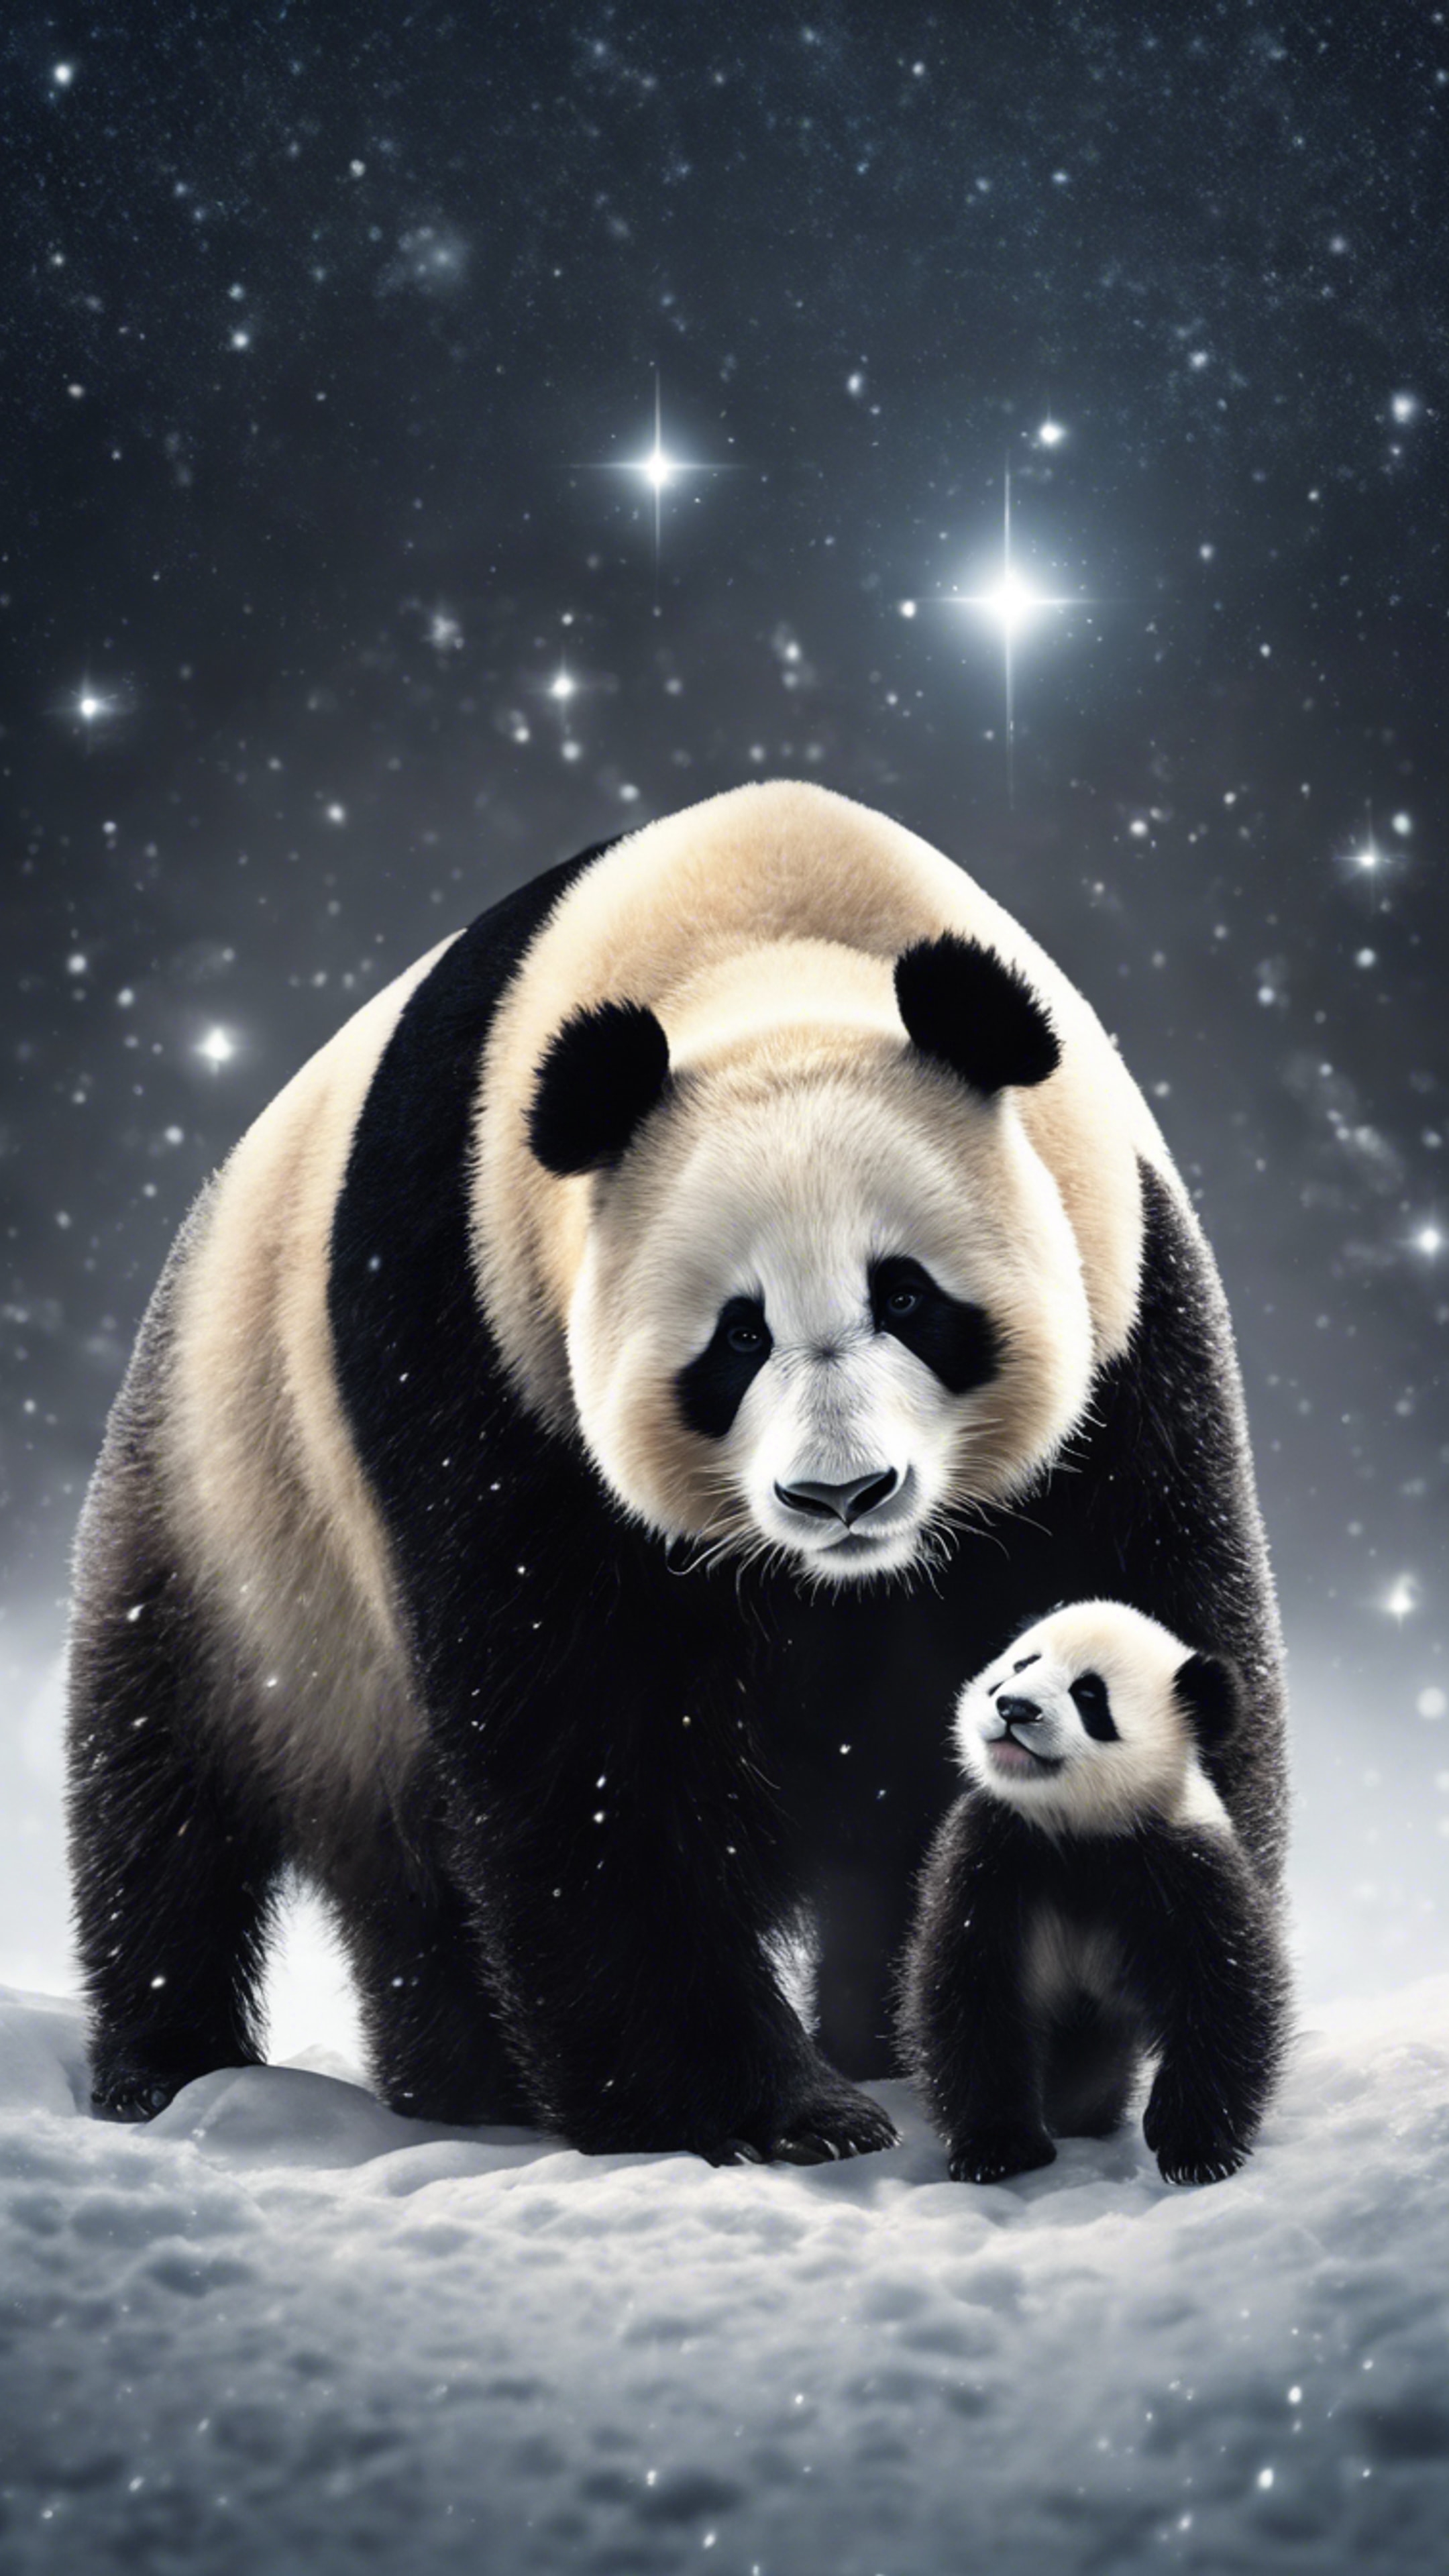 A mother panda with her cubs, peacefully taking a stroll on a silent, snowy night under a blanket of stars. Tapetai[875b5ef660eb48ddb691]